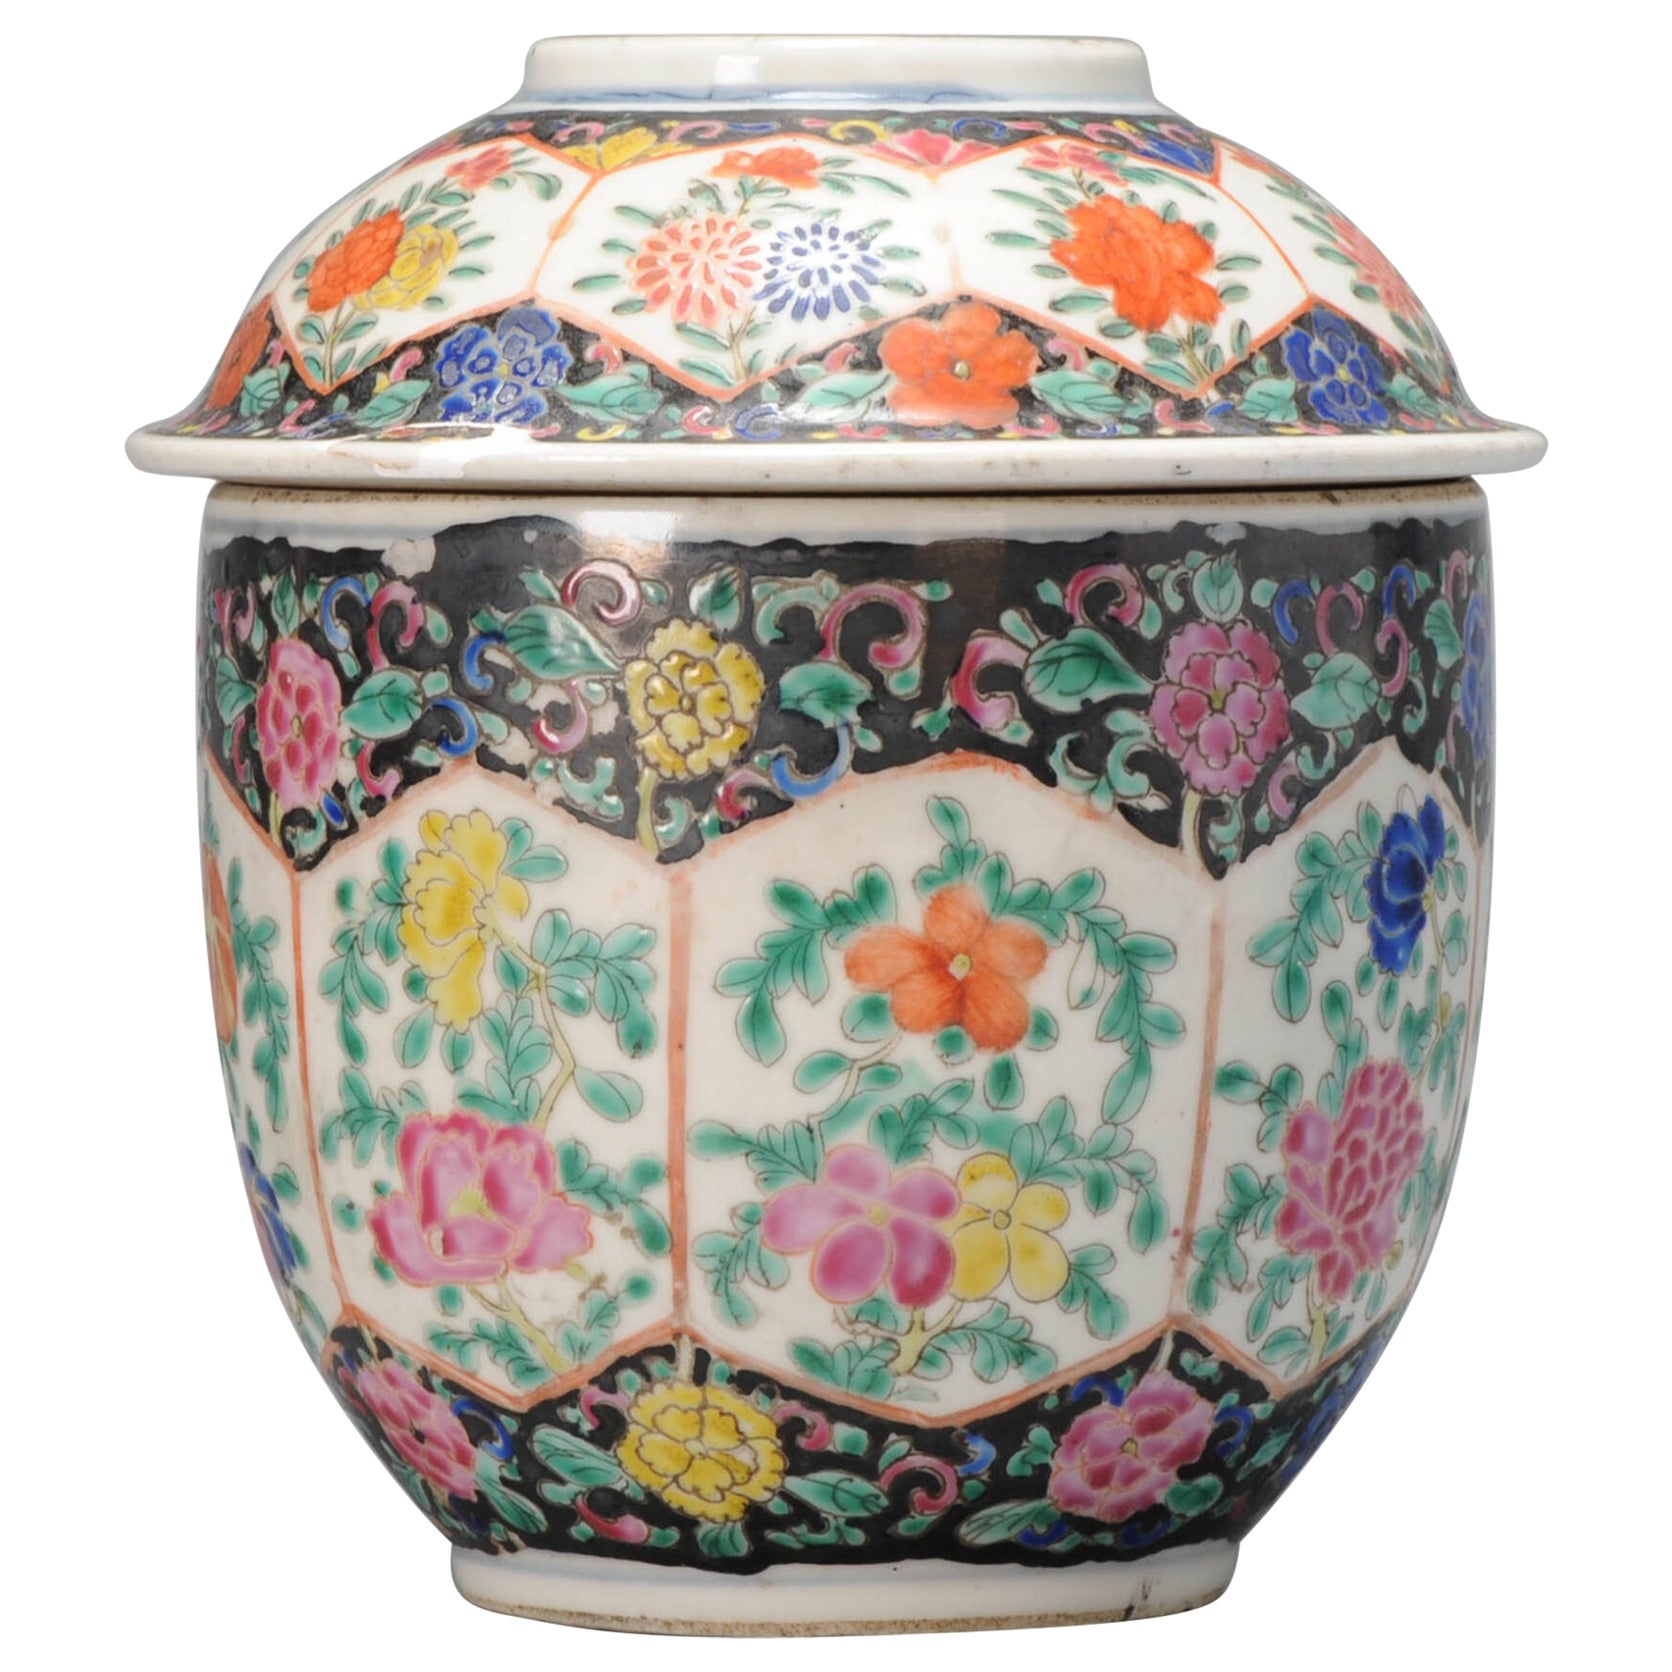 Antique Chinese Porcelain Thai Bencharong Jar with Flowers Black, 18/19th Cen For Sale